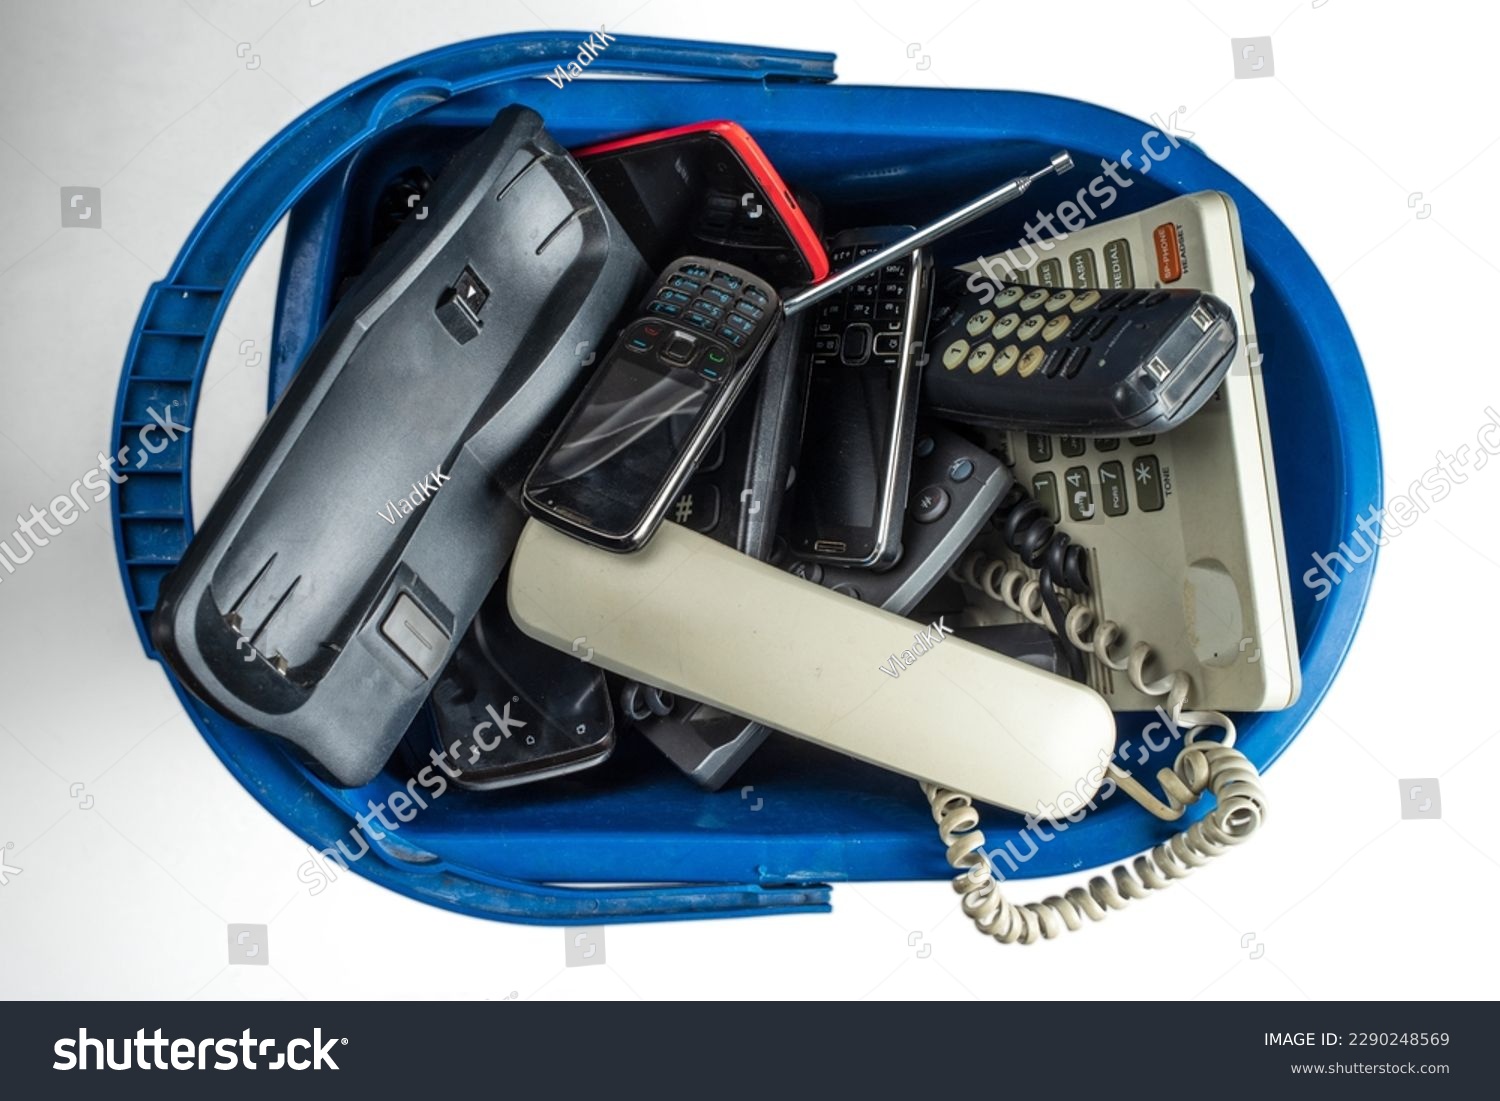 Old desk phones, cordless phone, cell phones, and smartphones in a trash can isolated on a white background. #2290248569